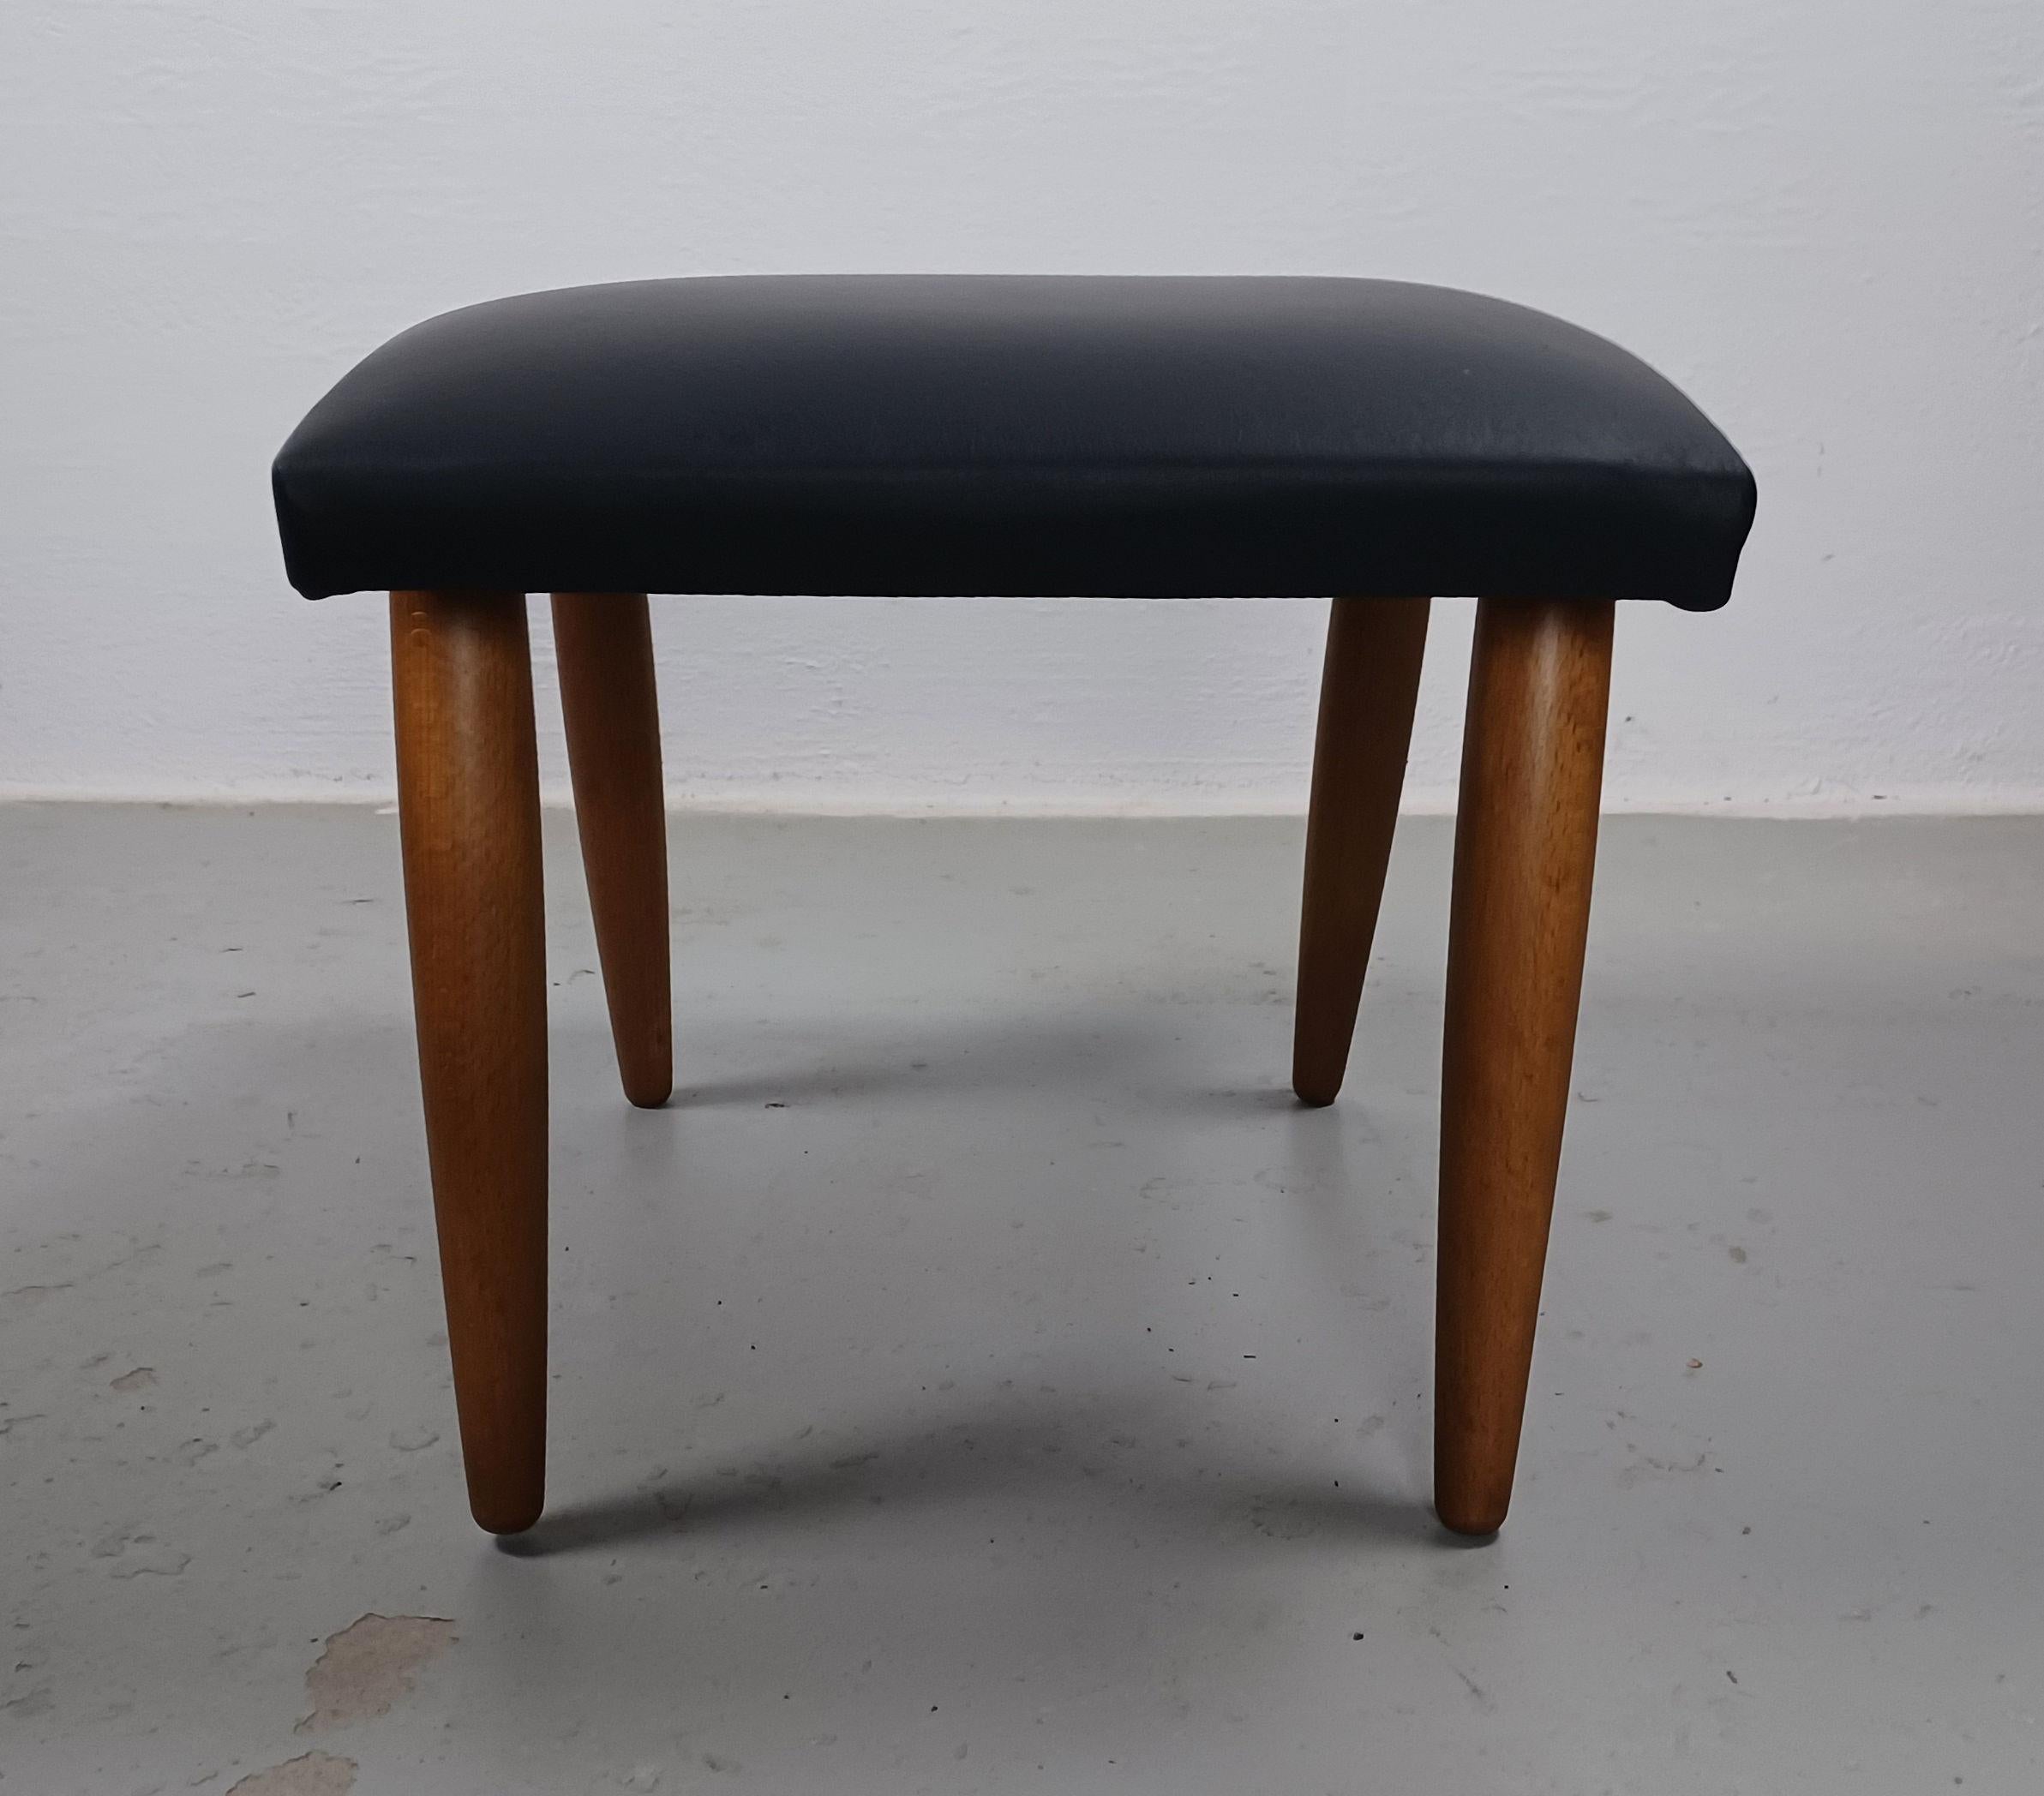 1960's, Restored Danish Footstool Reupholstered in Black Leather 1